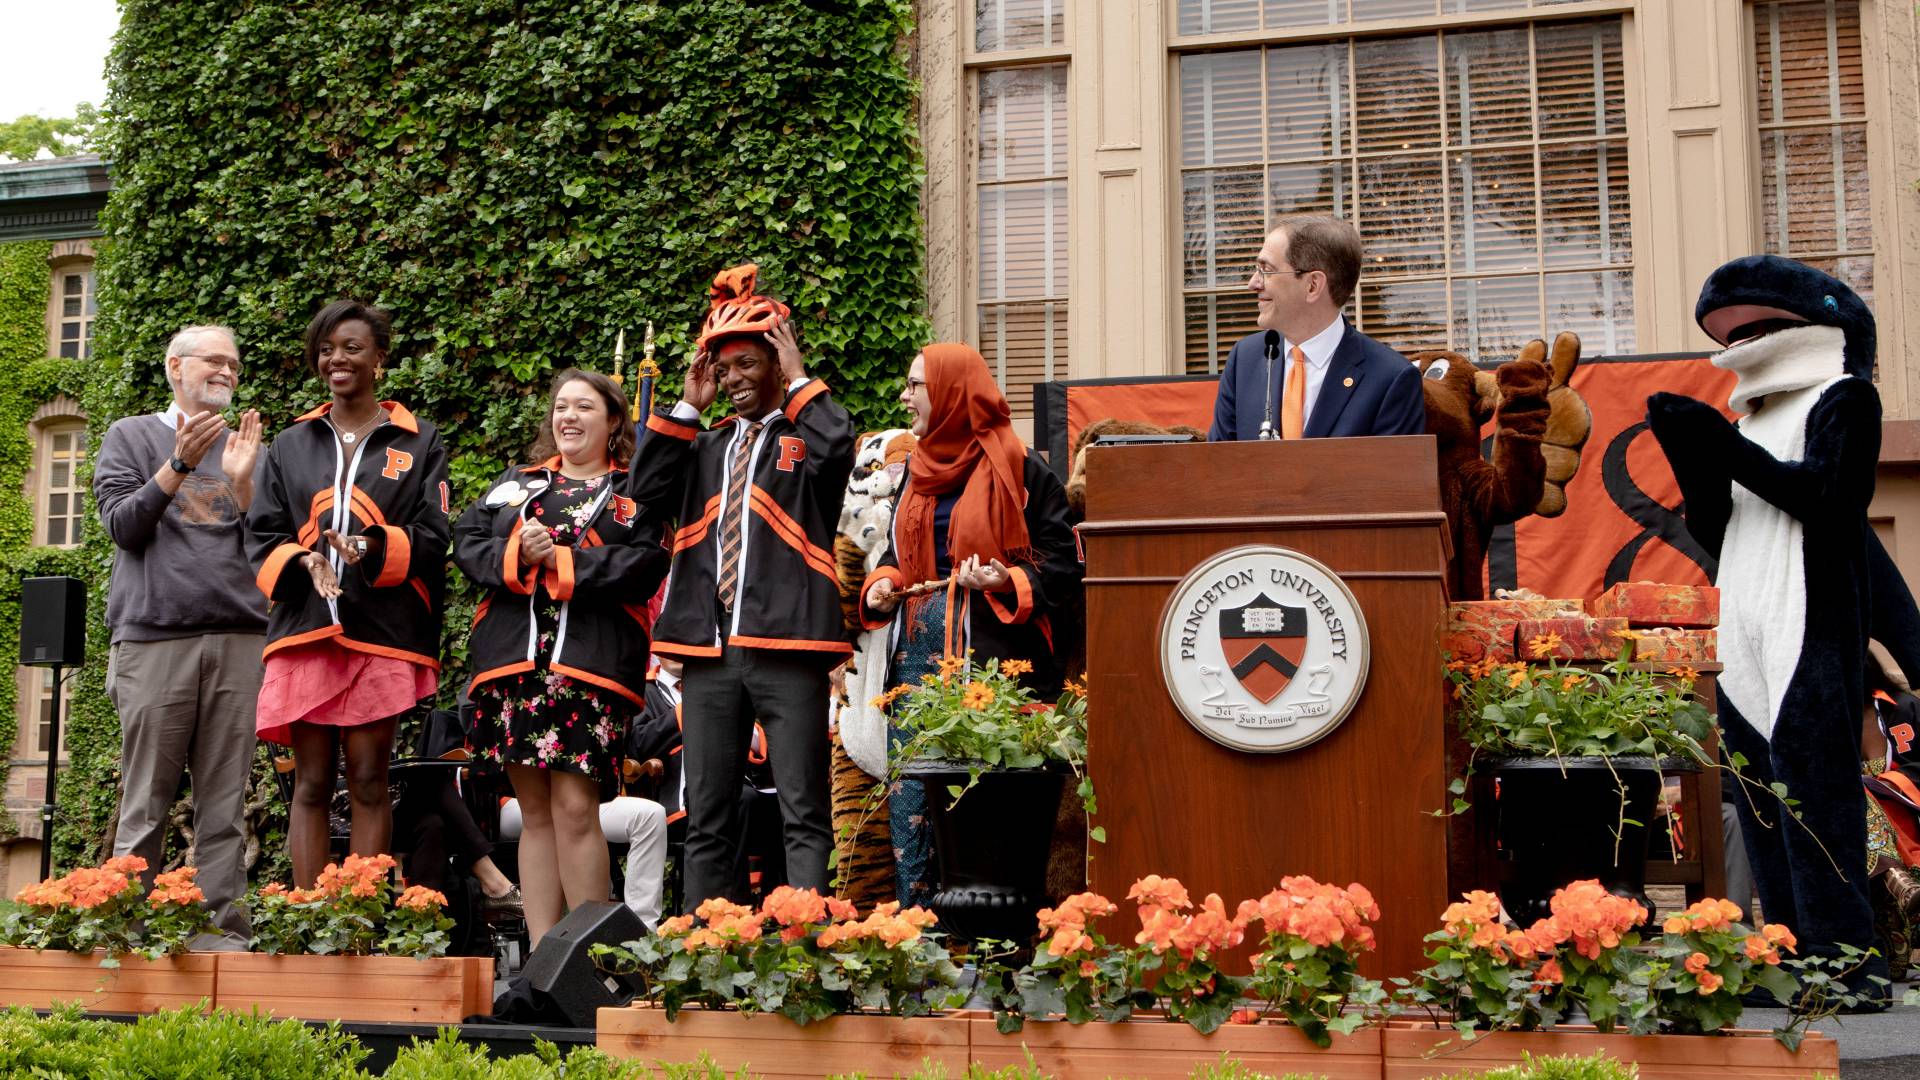 President Eisgruber on stage with students, mascots and professor Kernighan during Class Day ceremony